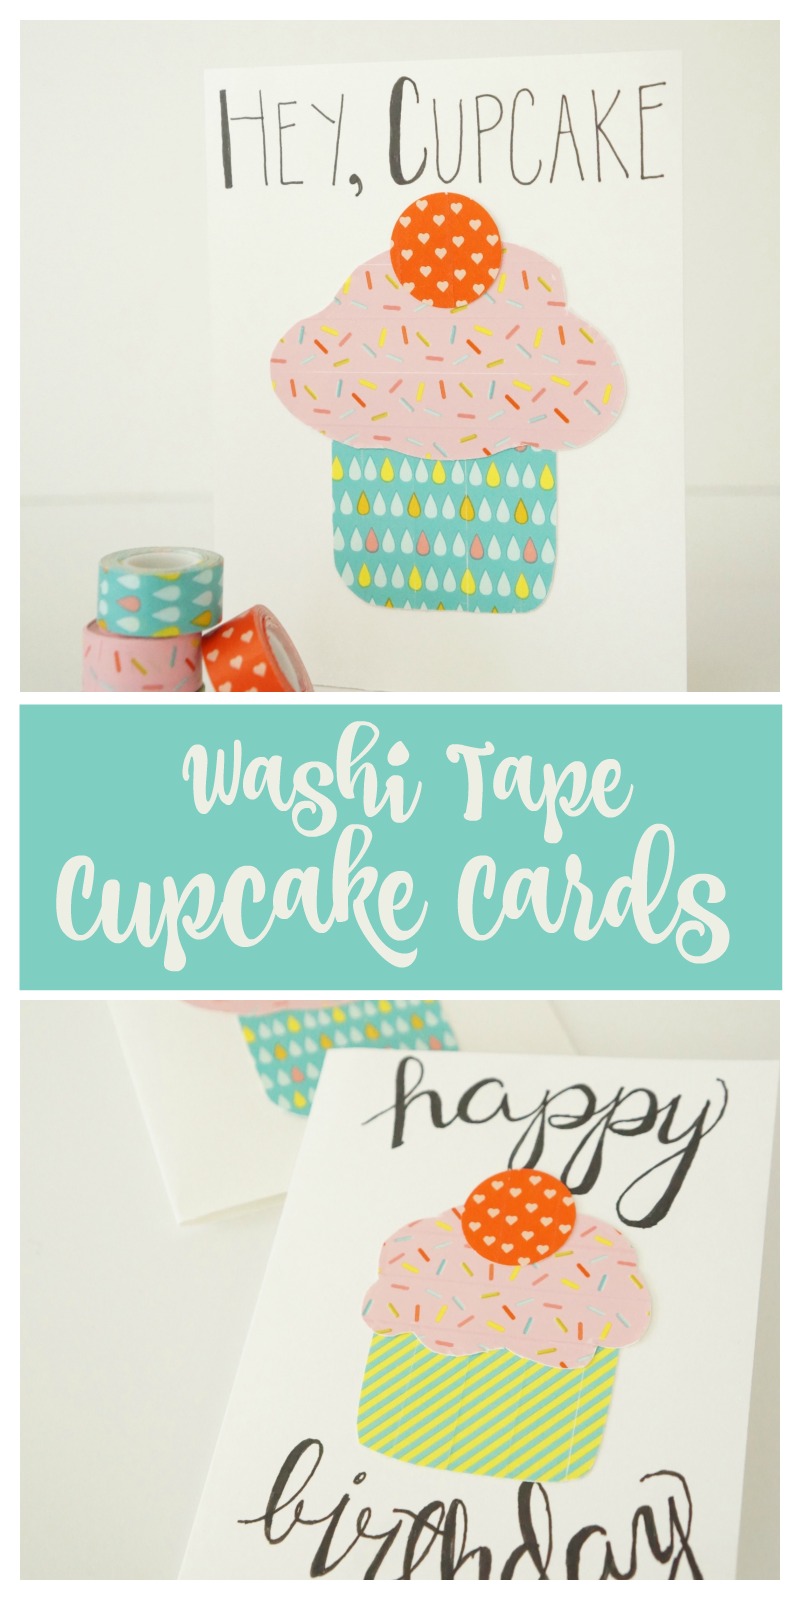 Too cute!! Love these simple cupcake birthday cards made from washi tape!